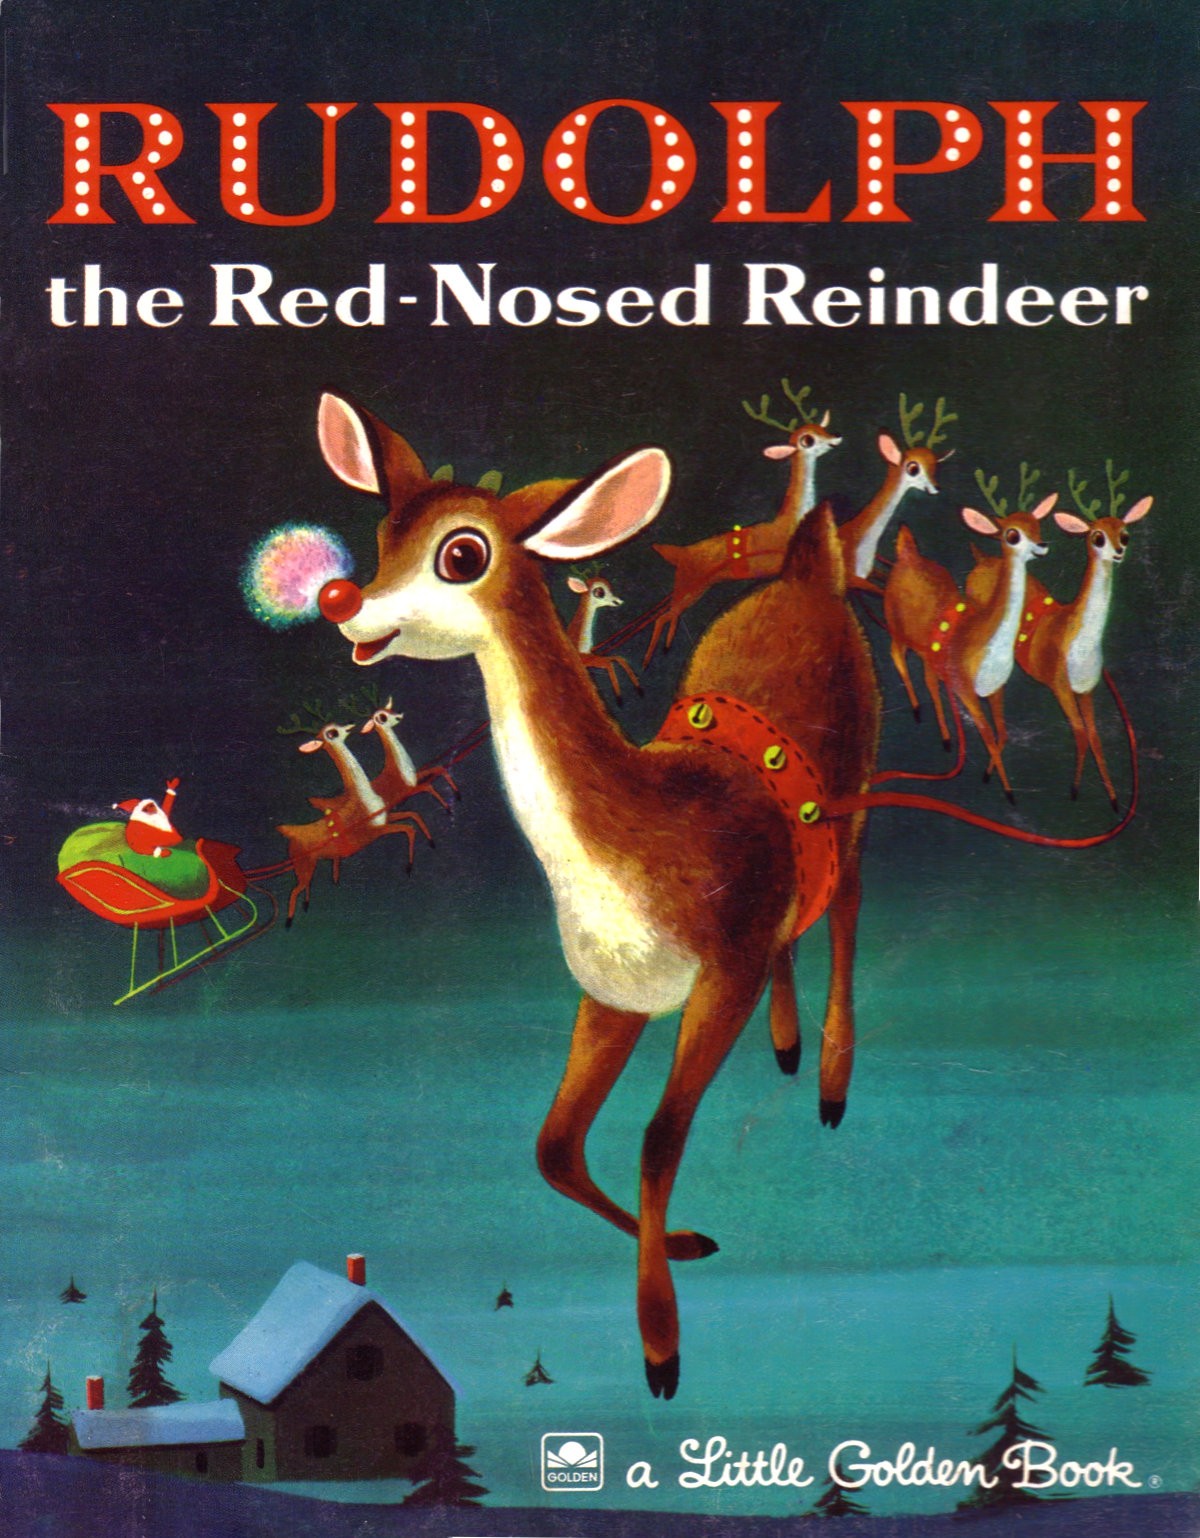 Rudolph The Red-nosed Reindeer: You don’t have to be useful